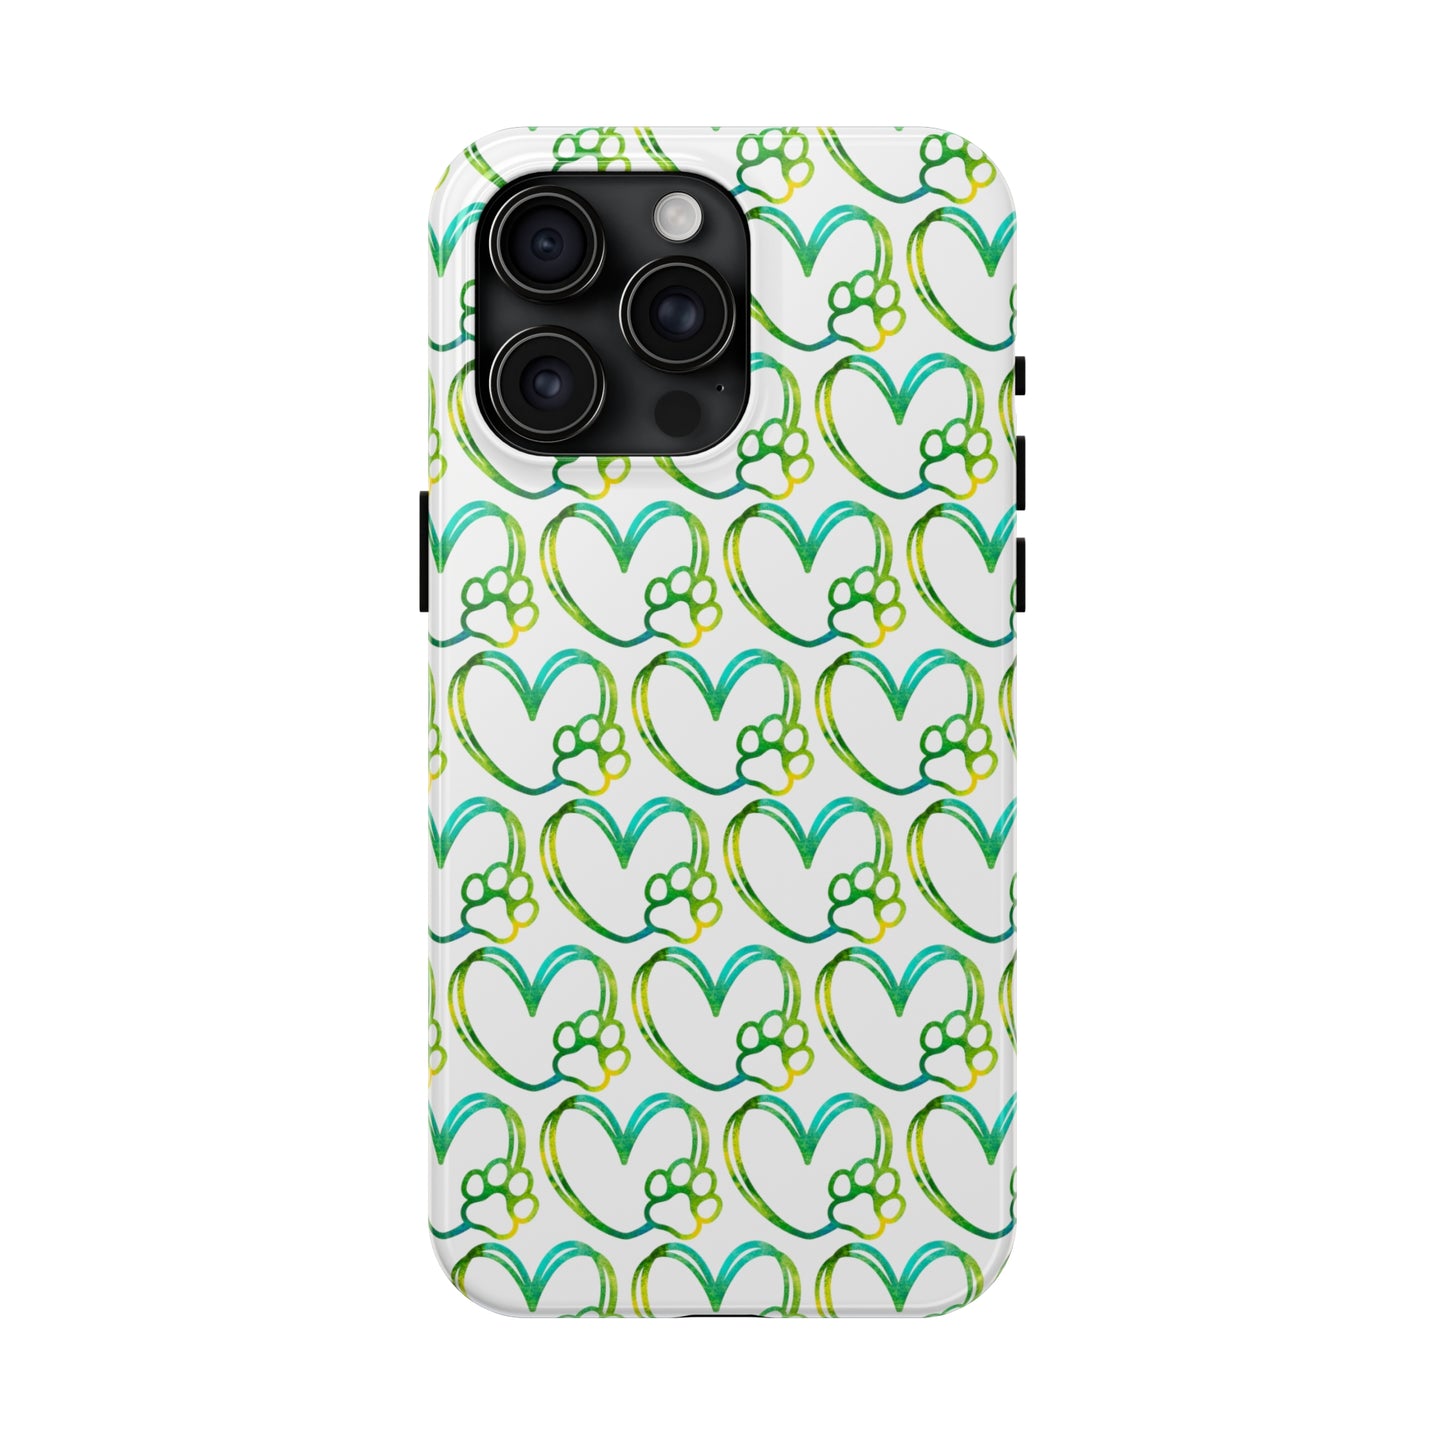 Paw Heart: iPhone Tough Case Design - Wireless Charging - Superior Protection - Original Graphics by TheGlassyLass.com